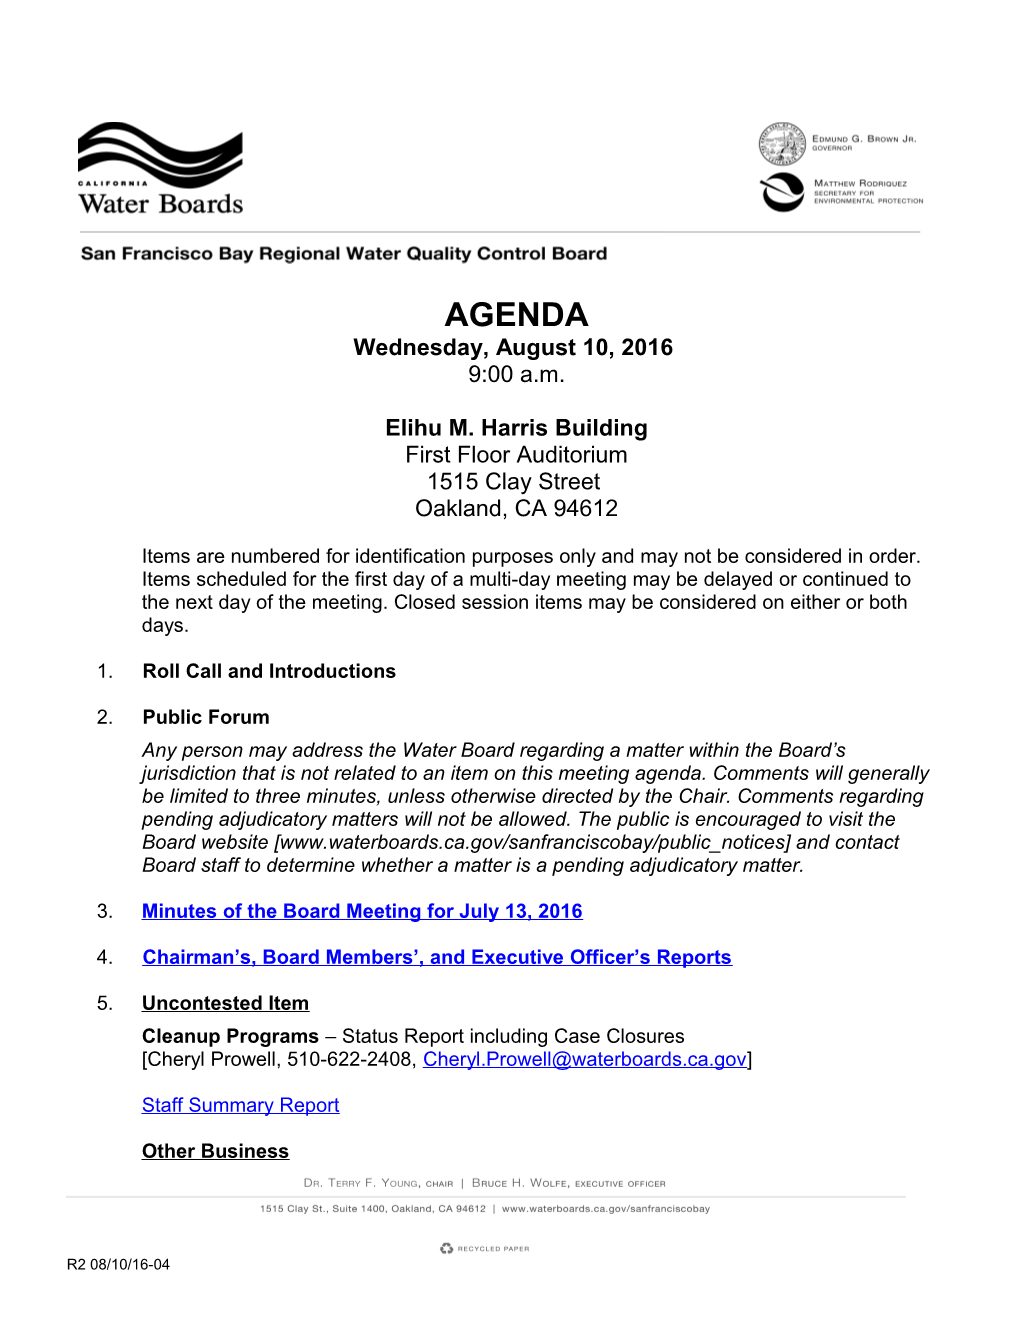 Water Board Meeting Agenda Page 2 s1